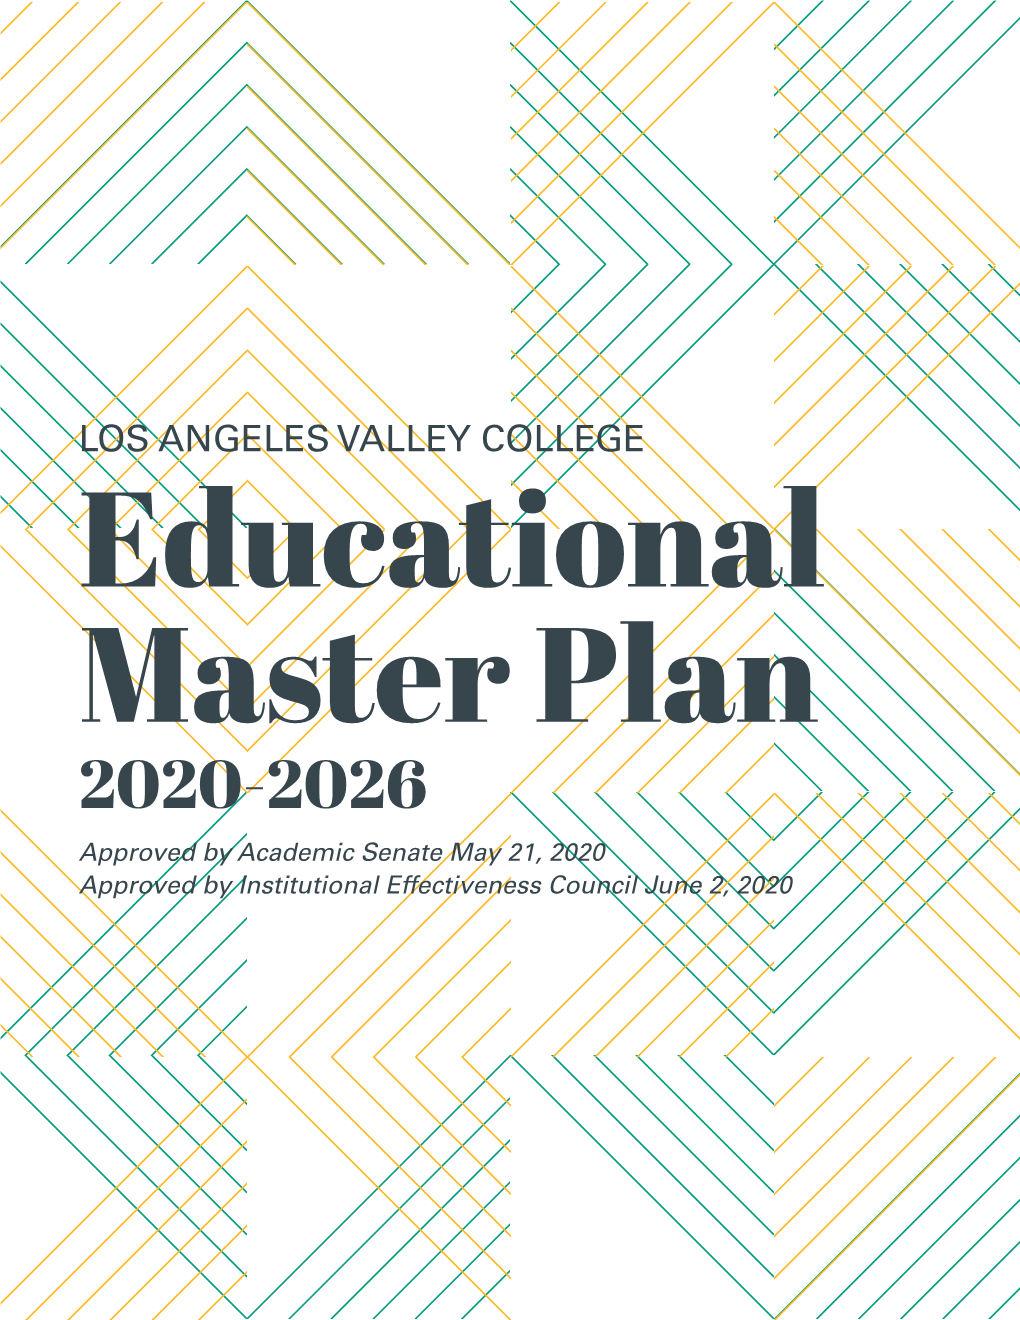 Los Angeles Valley College Educational Master Plan 2020-2026